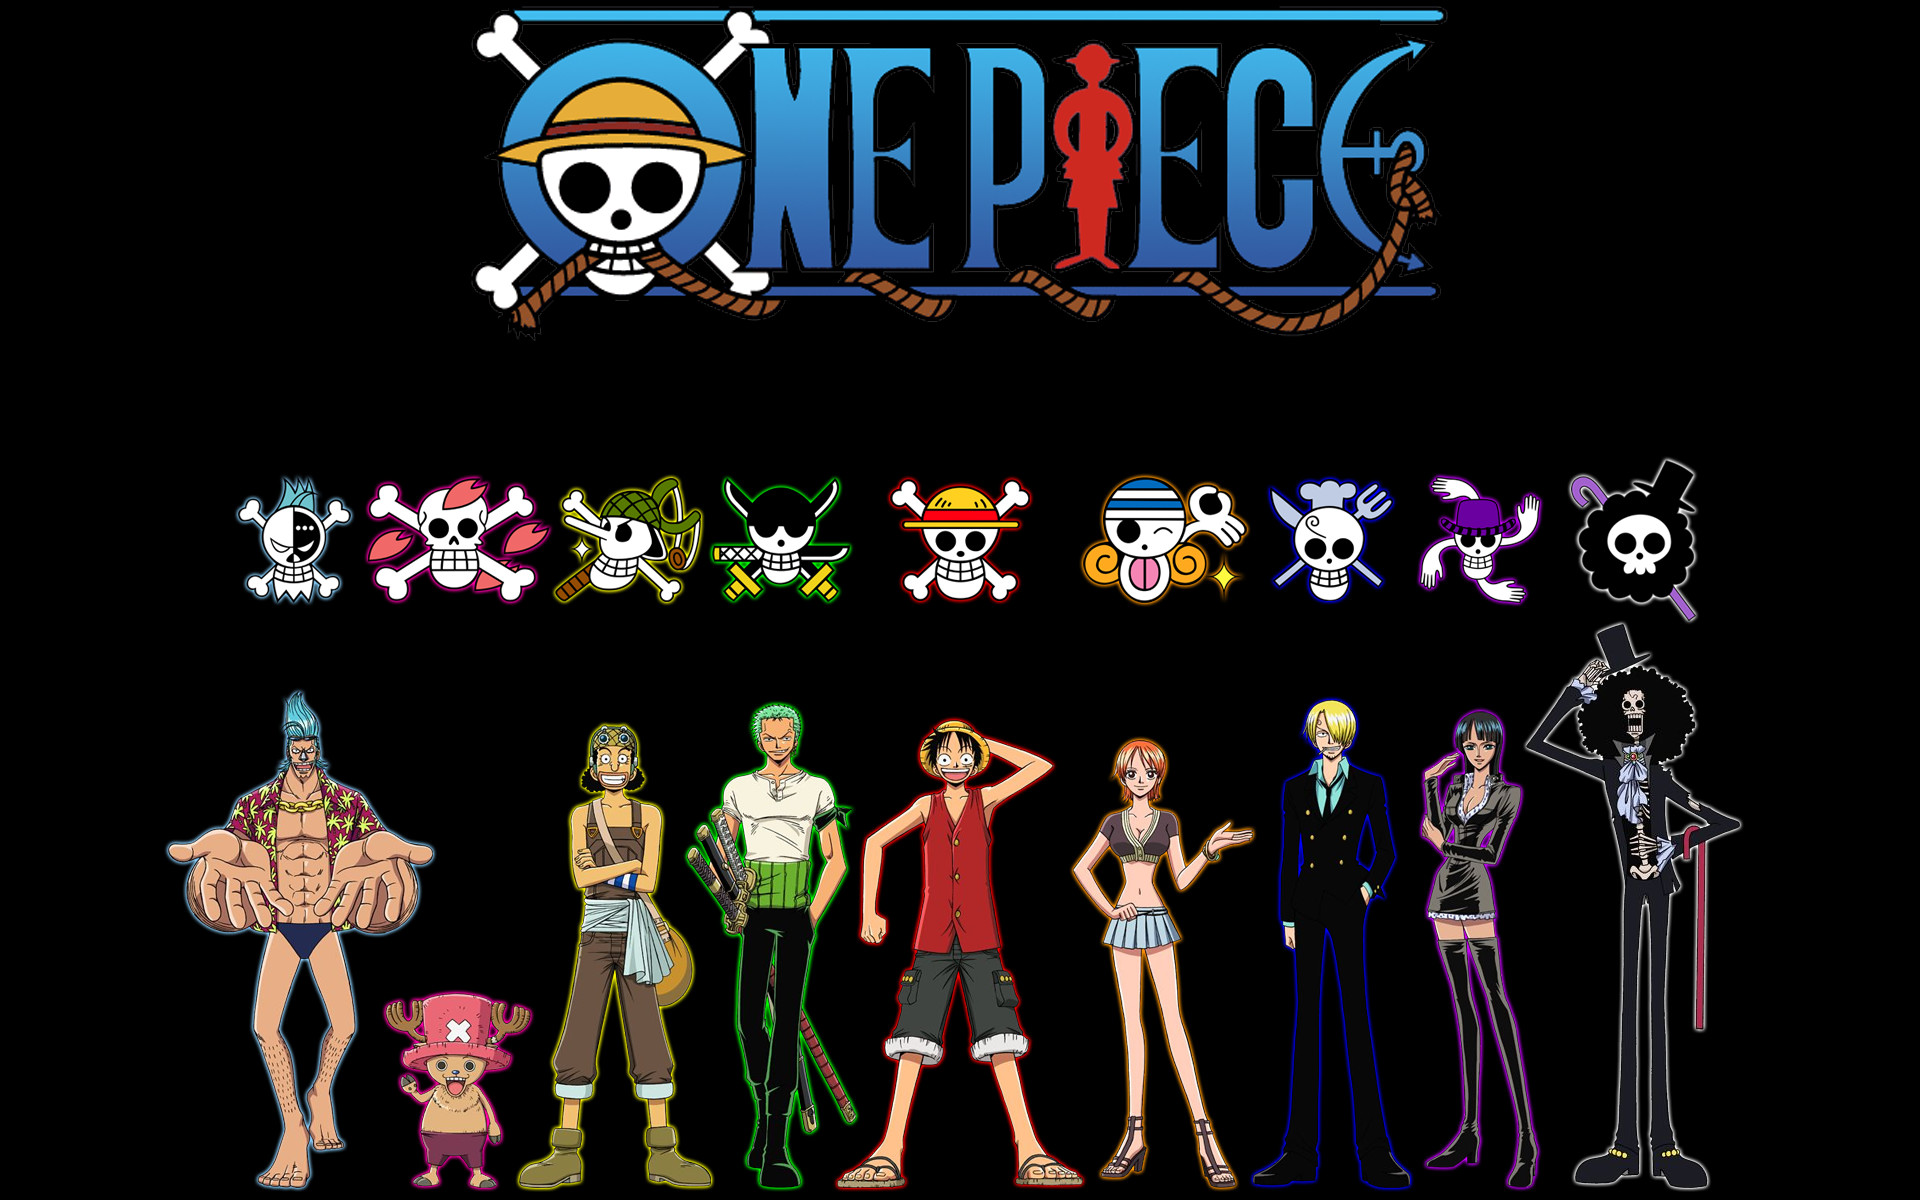 1920x1200 ... Attachment file for One Piece Wallpaper - All Straw Hat Pirates  Characters in Black Background ...